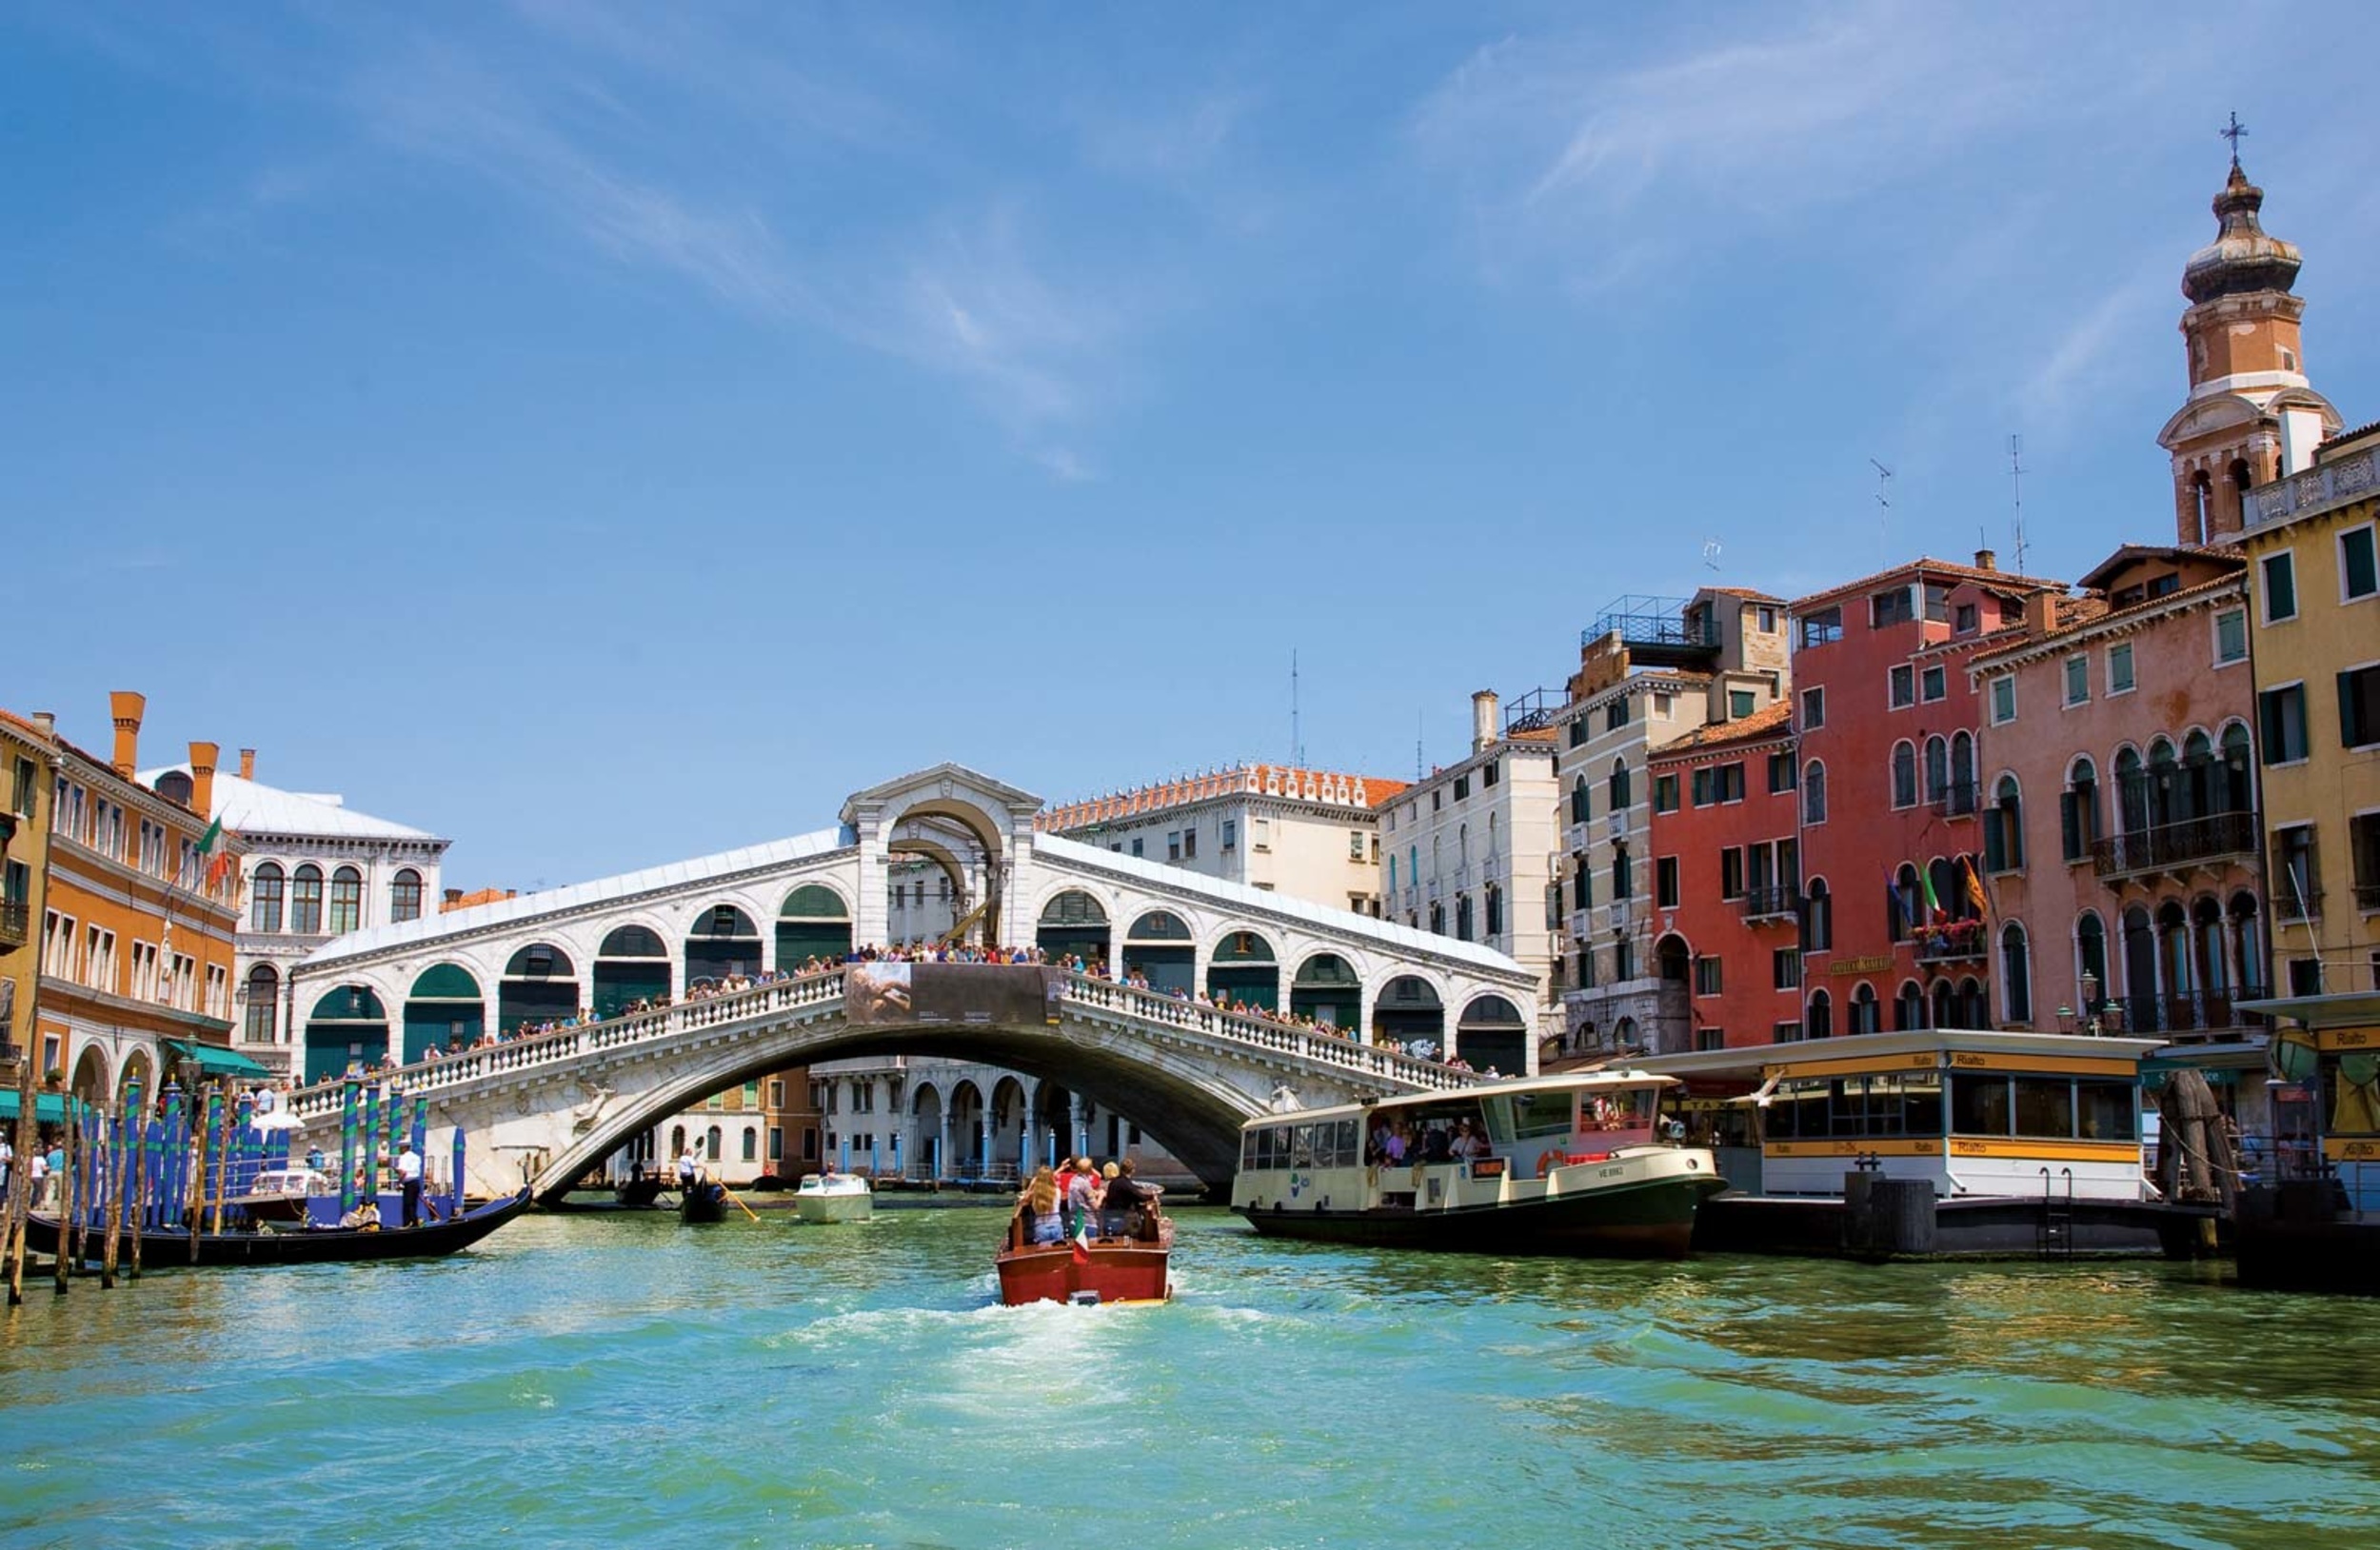 15 things you must do in Venice, Italy